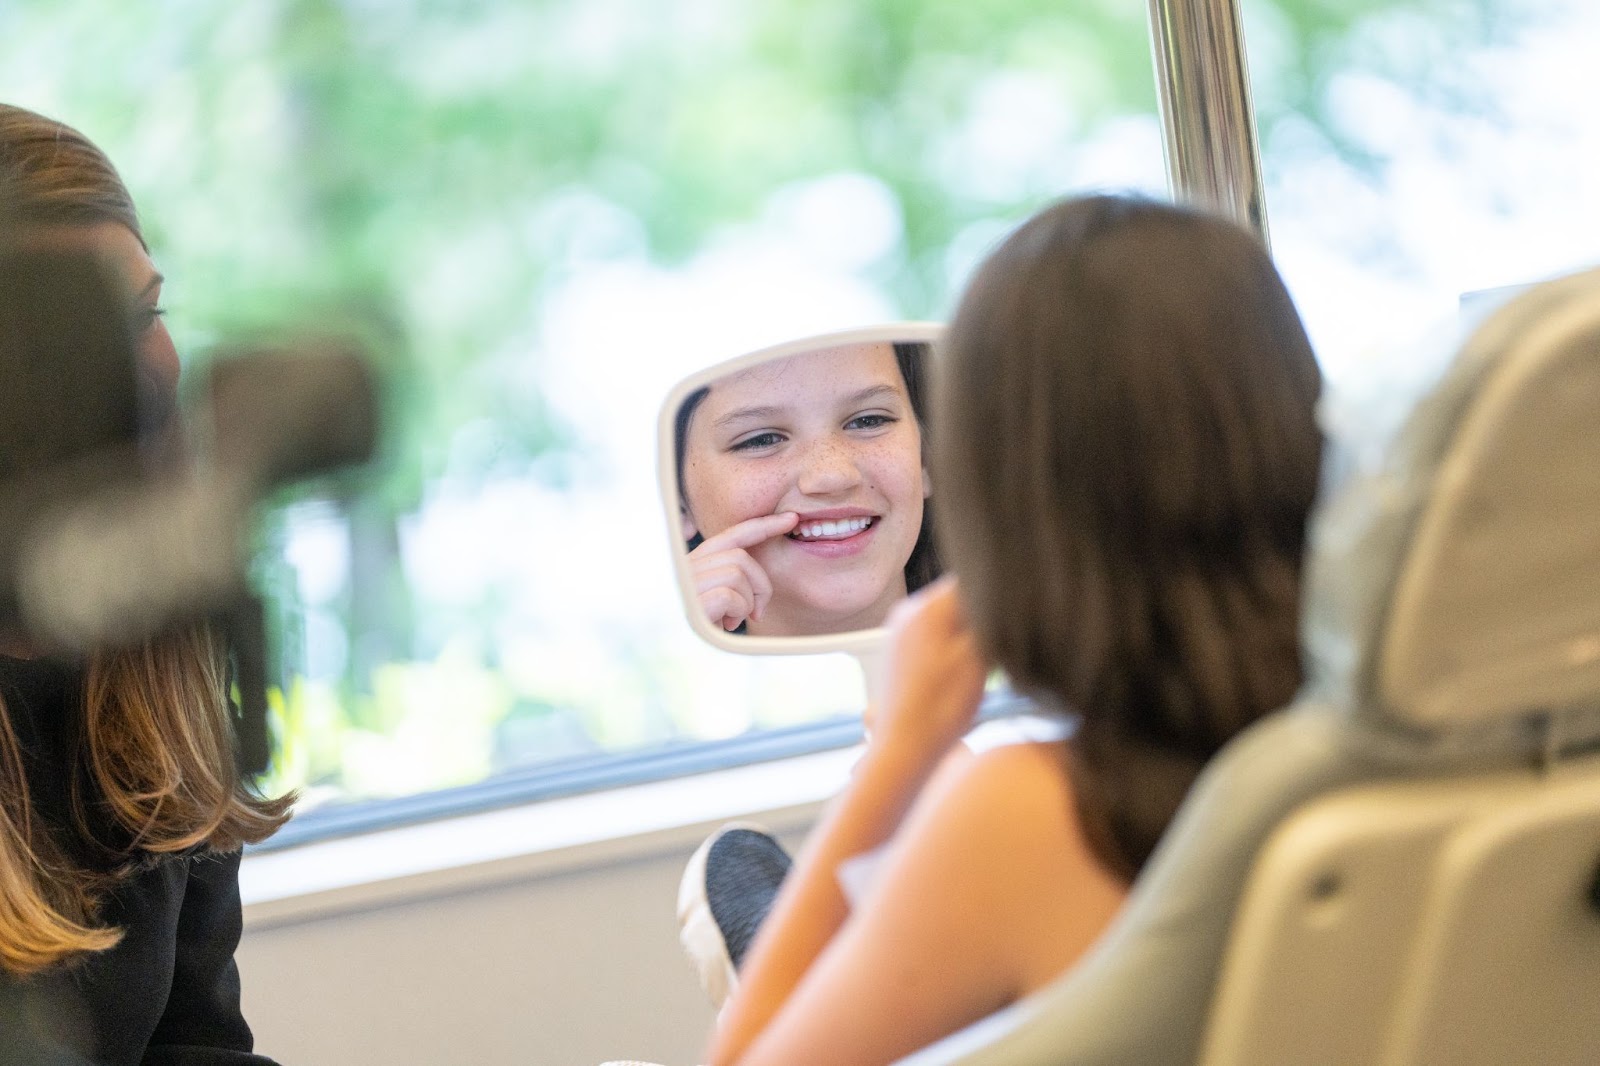 Did you know braces aren't the only tool at RiverView Orthodontics to straighten smiles? Let's learn about life with a palatal expander!